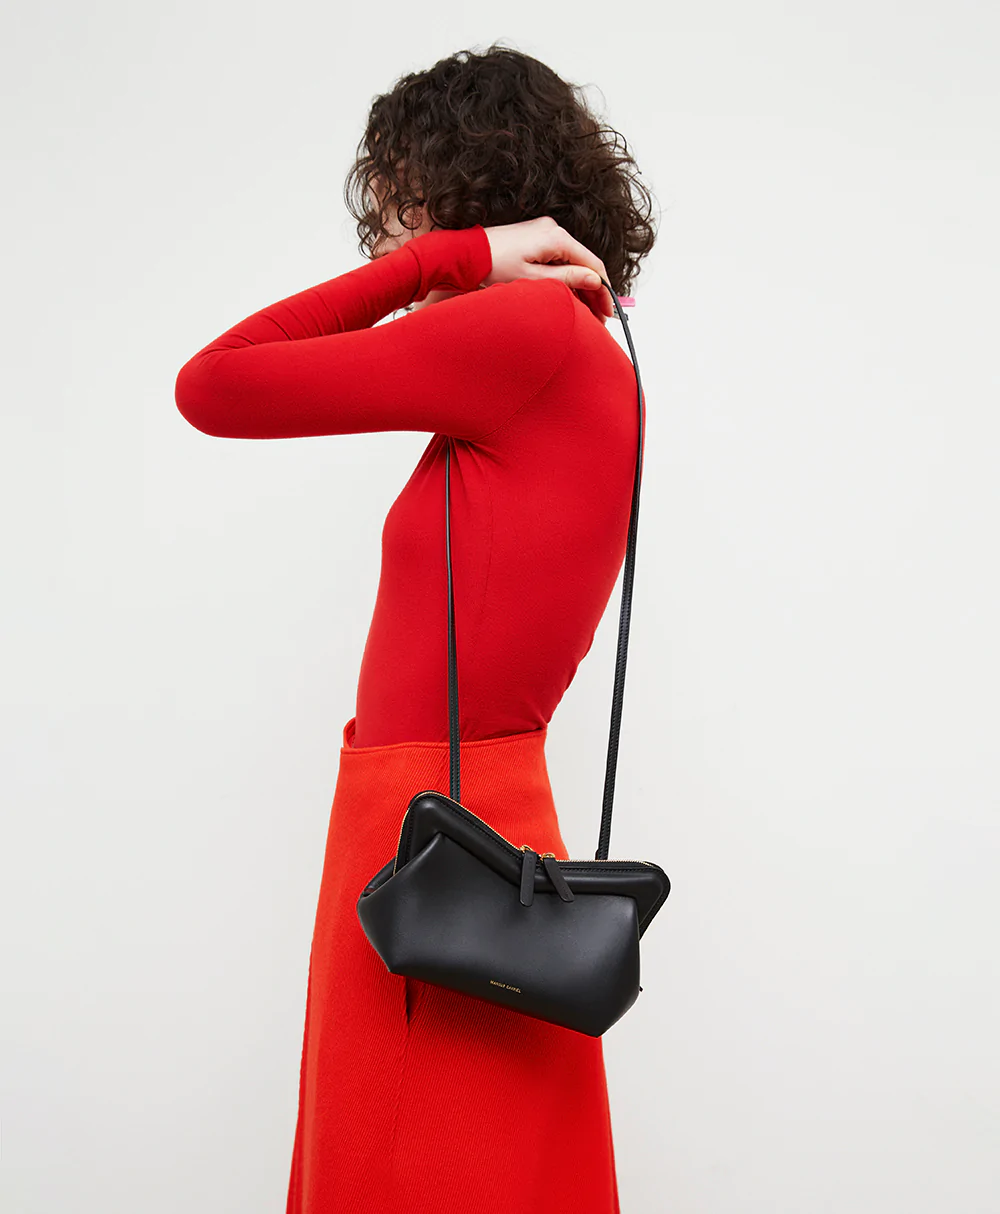 Mansur Gavriel Mini Protea Bag Review: Is It Worth It & What Fits In It? —  Fairly Curated